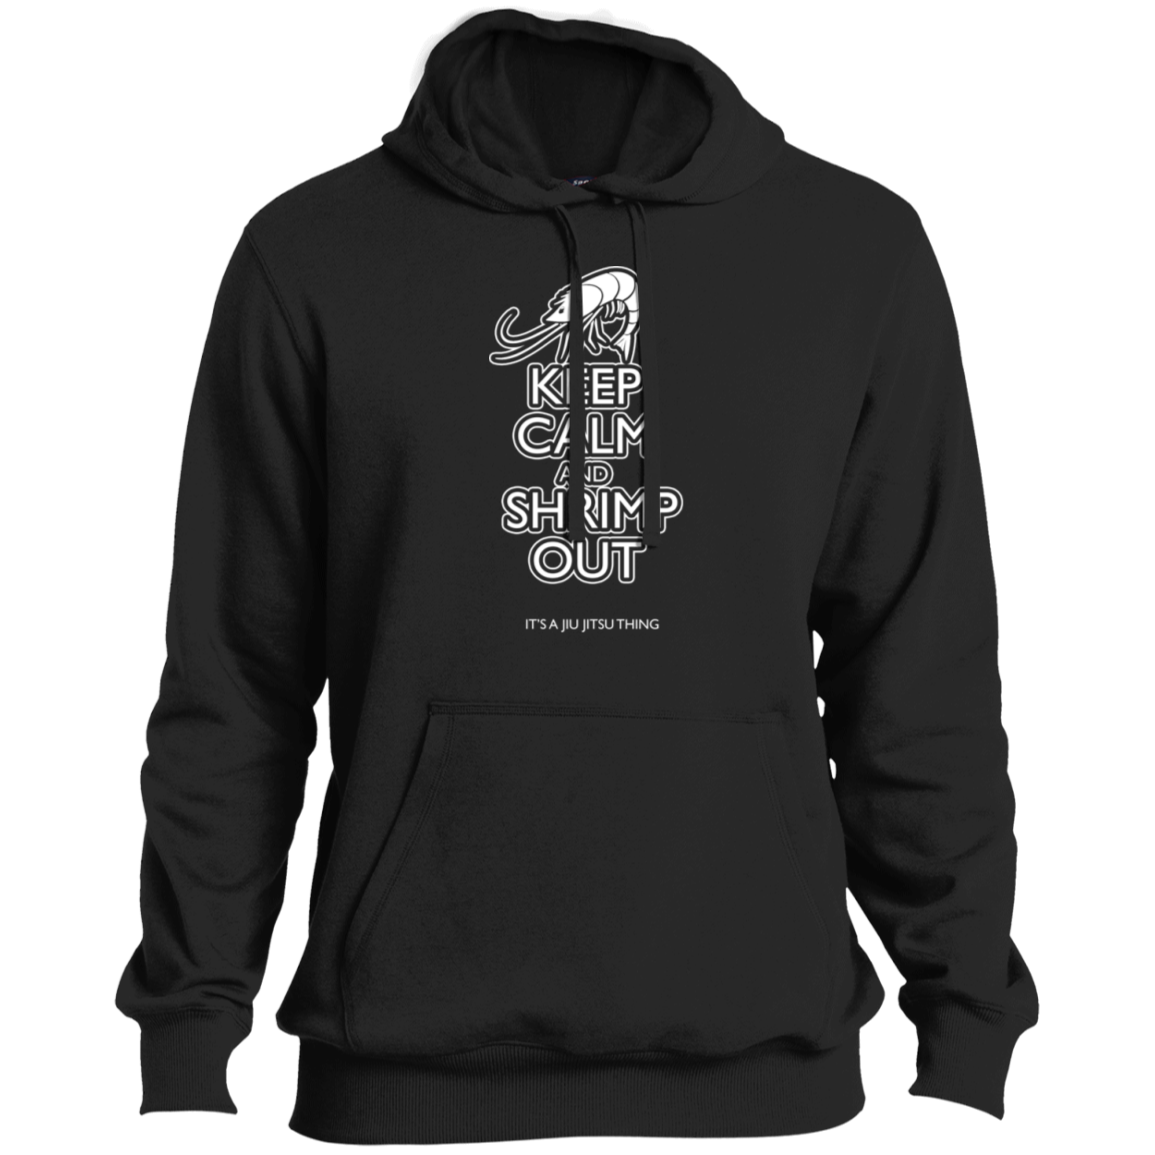 Artichoke Fight Gear Custom Design #12. Keep Calm and Shrimp Out. Ultra Soft Pullover Hoodie